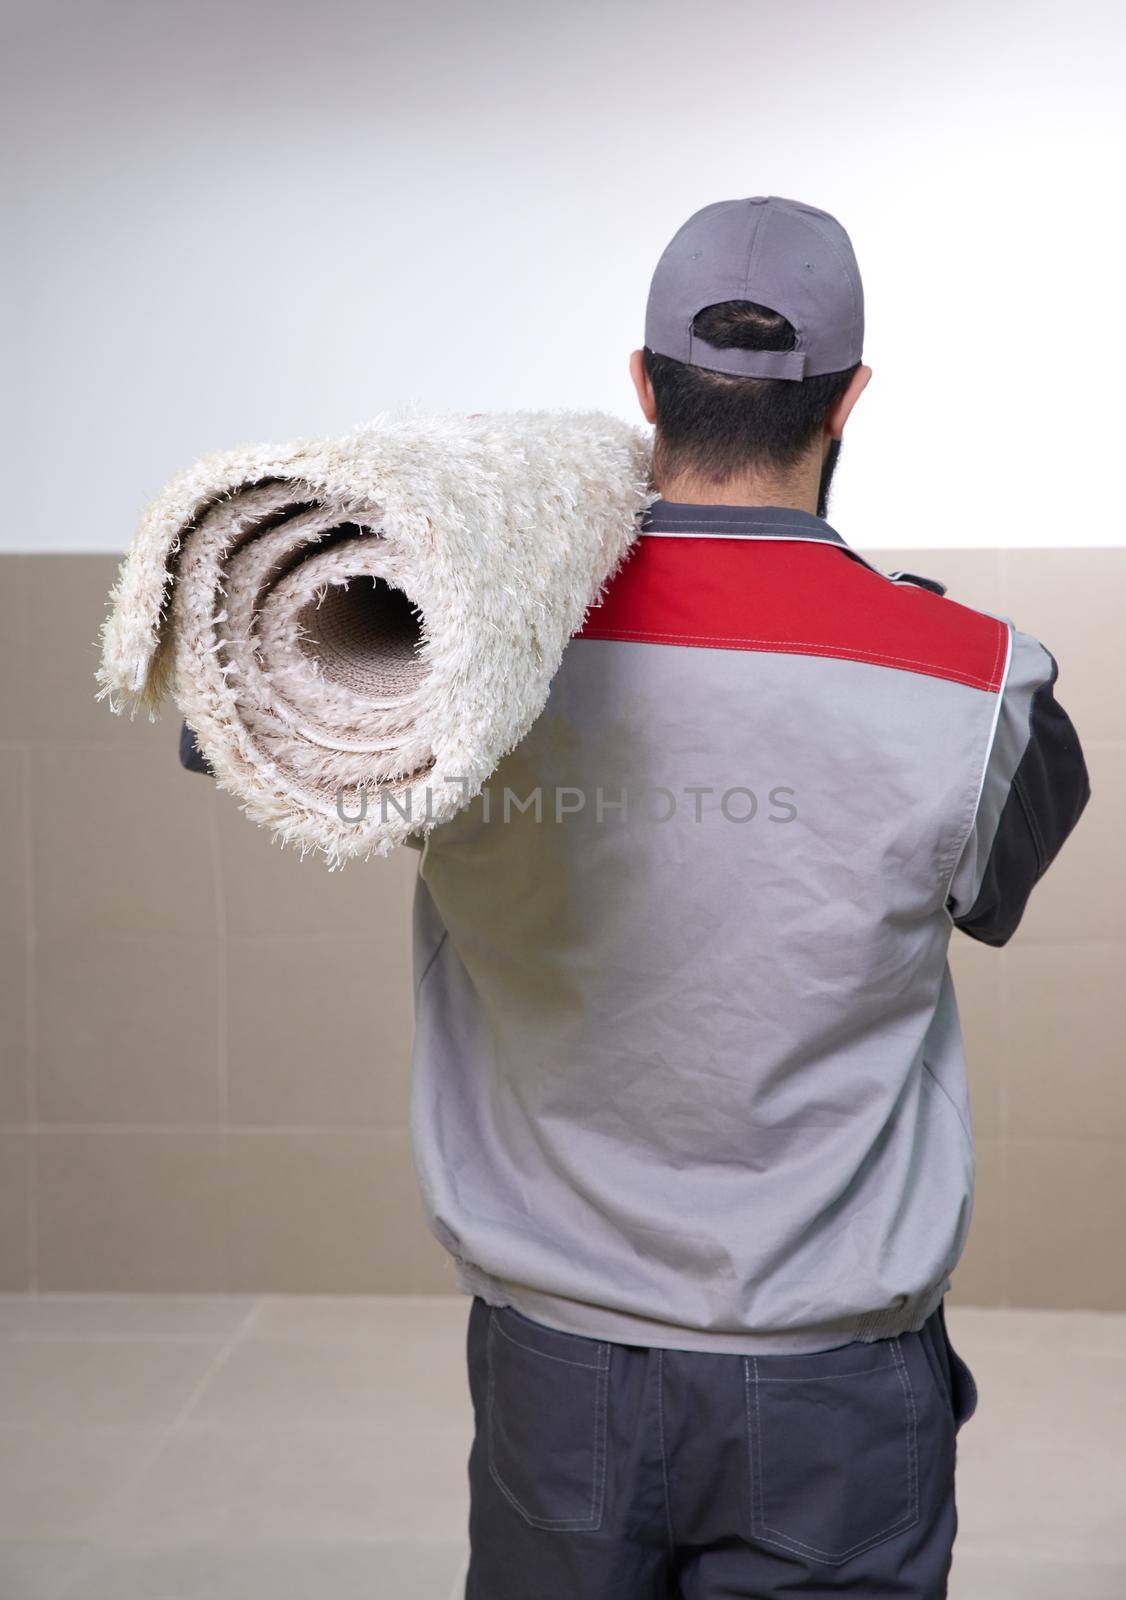 Man wearing uniform standing with a roll of carpet on his shoulder, back view by Mariakray